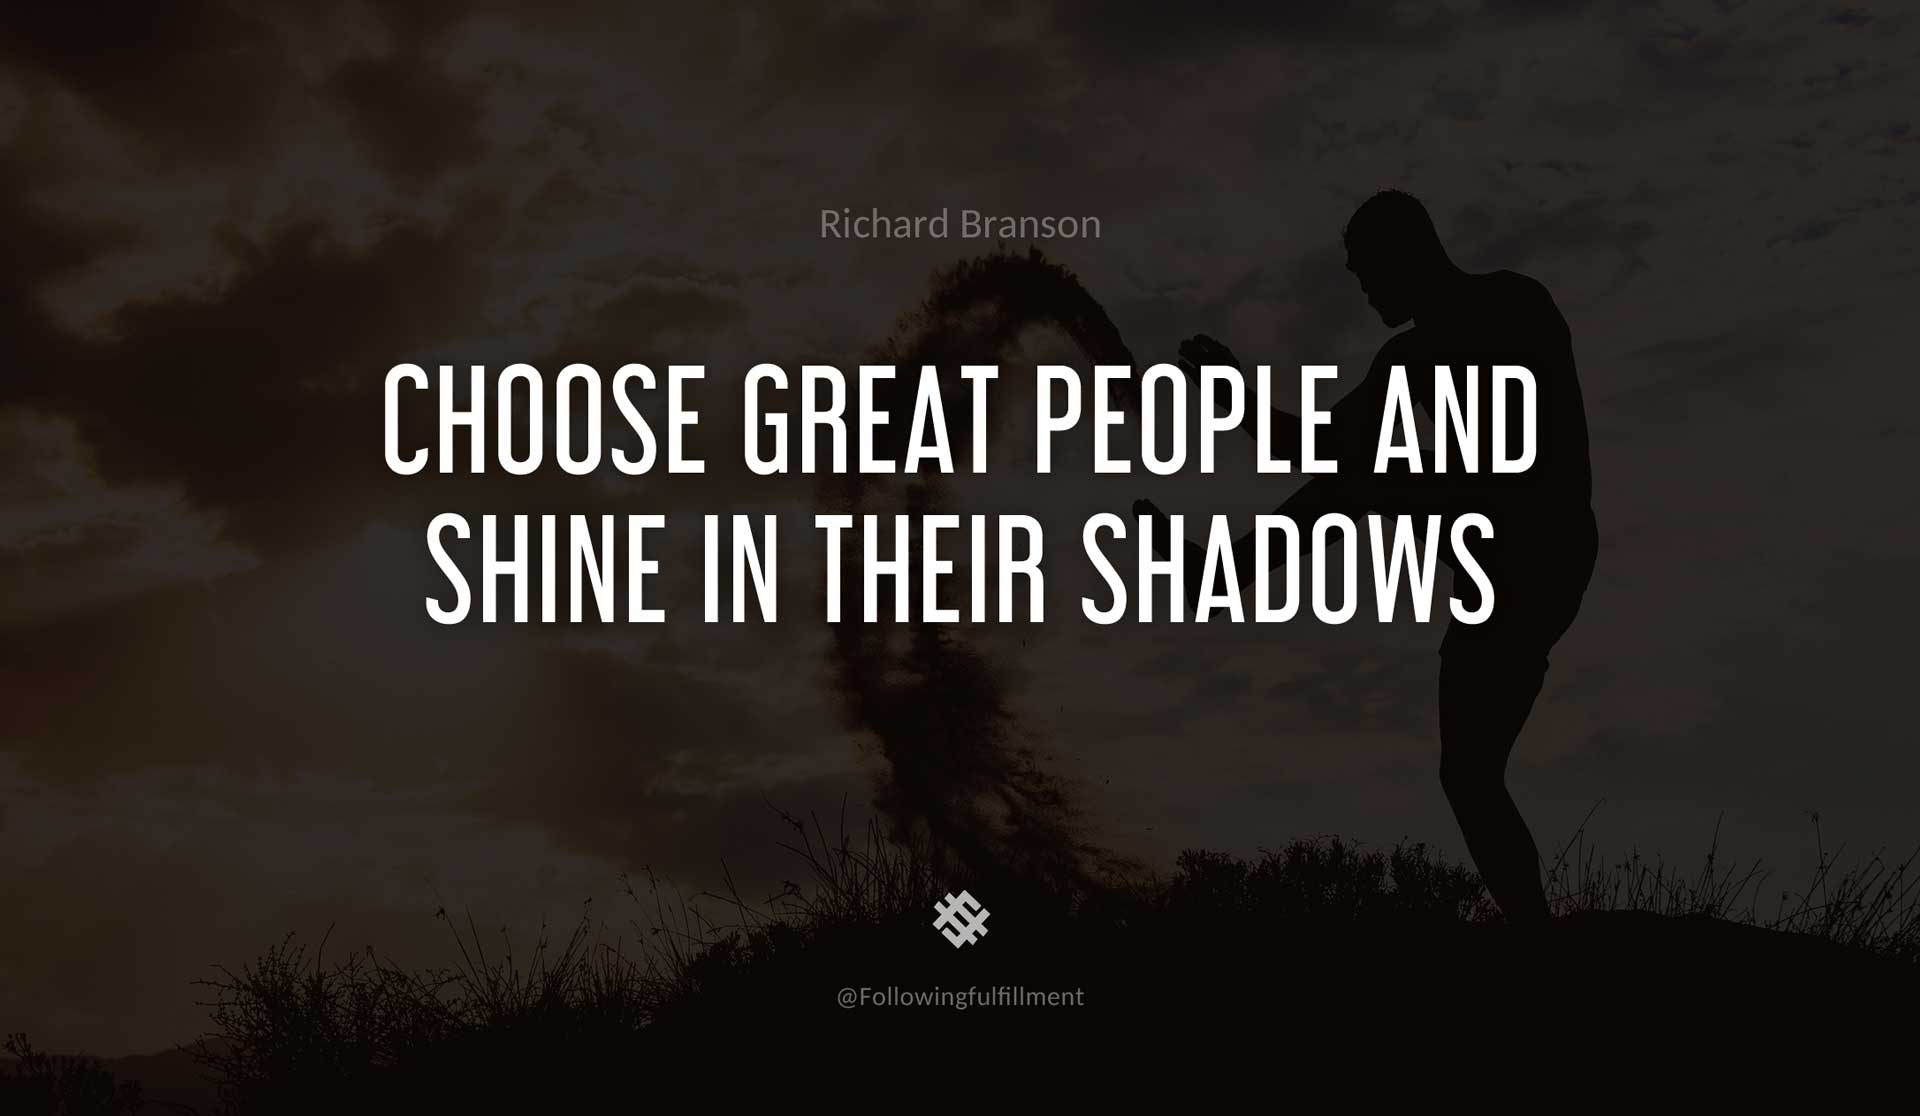 Choose-great-people-and-shine-in-their-shadows-RICHARD-BRANSON-Quote.jpg